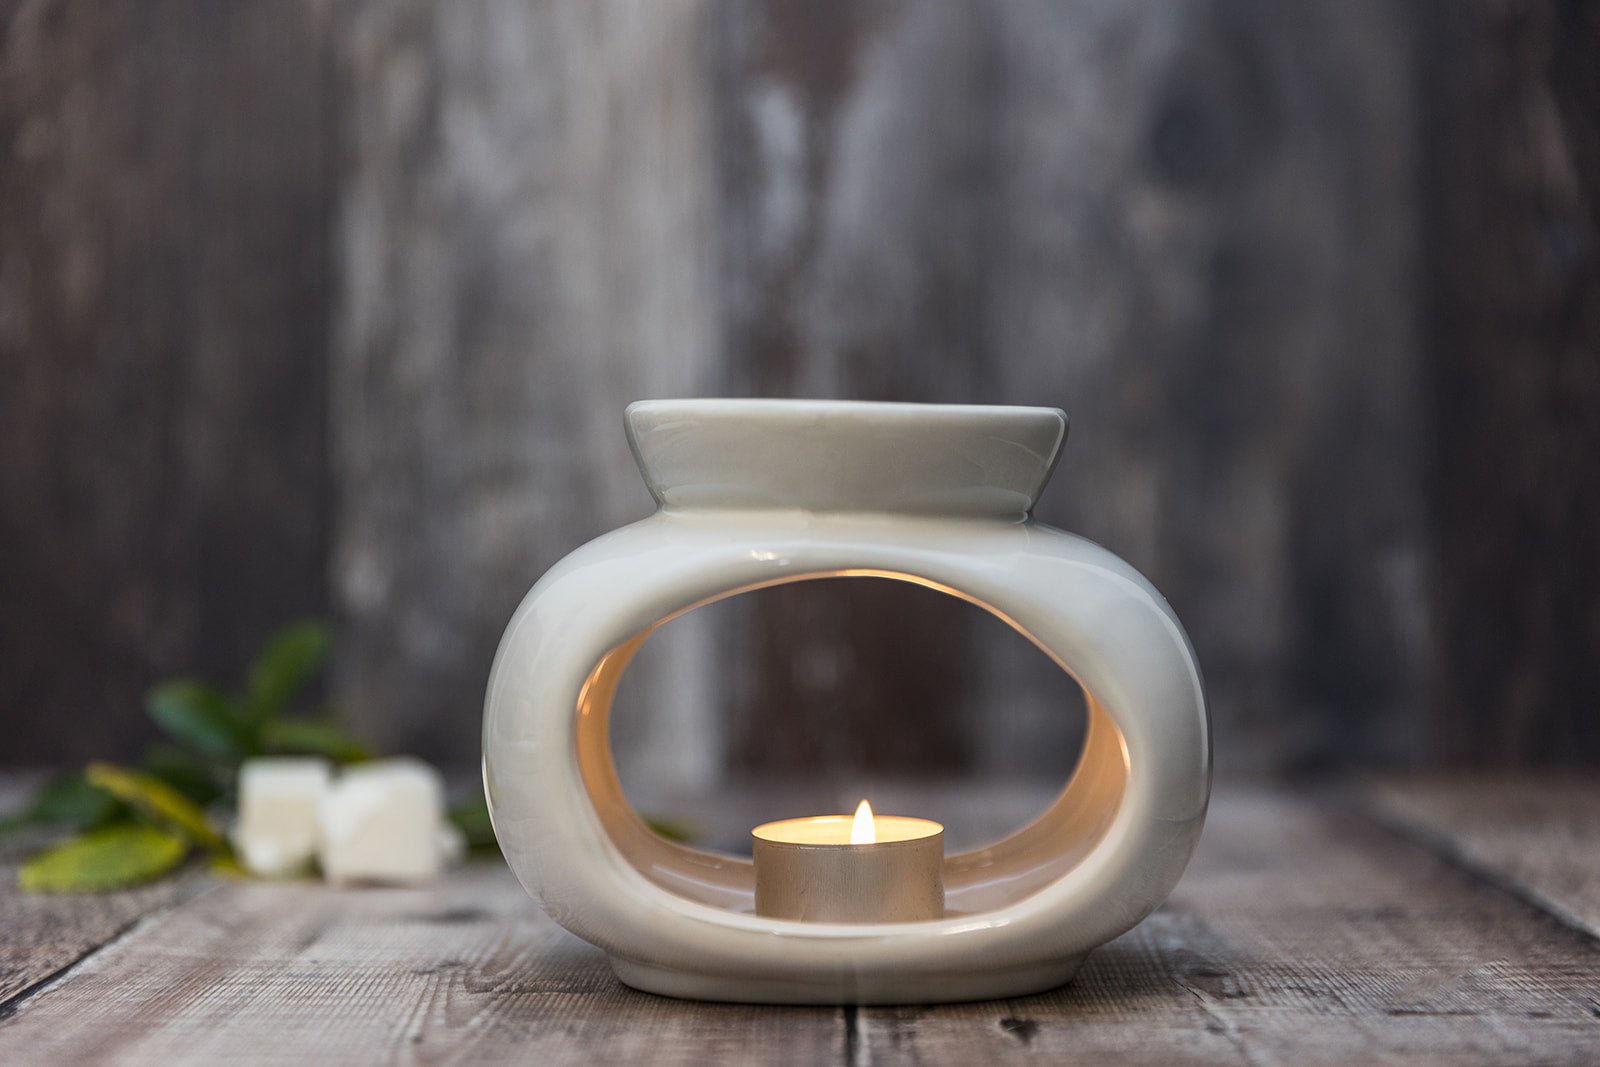 White Ceramic Oval Double Dish Wax Burner - A Melt In Time Ltd